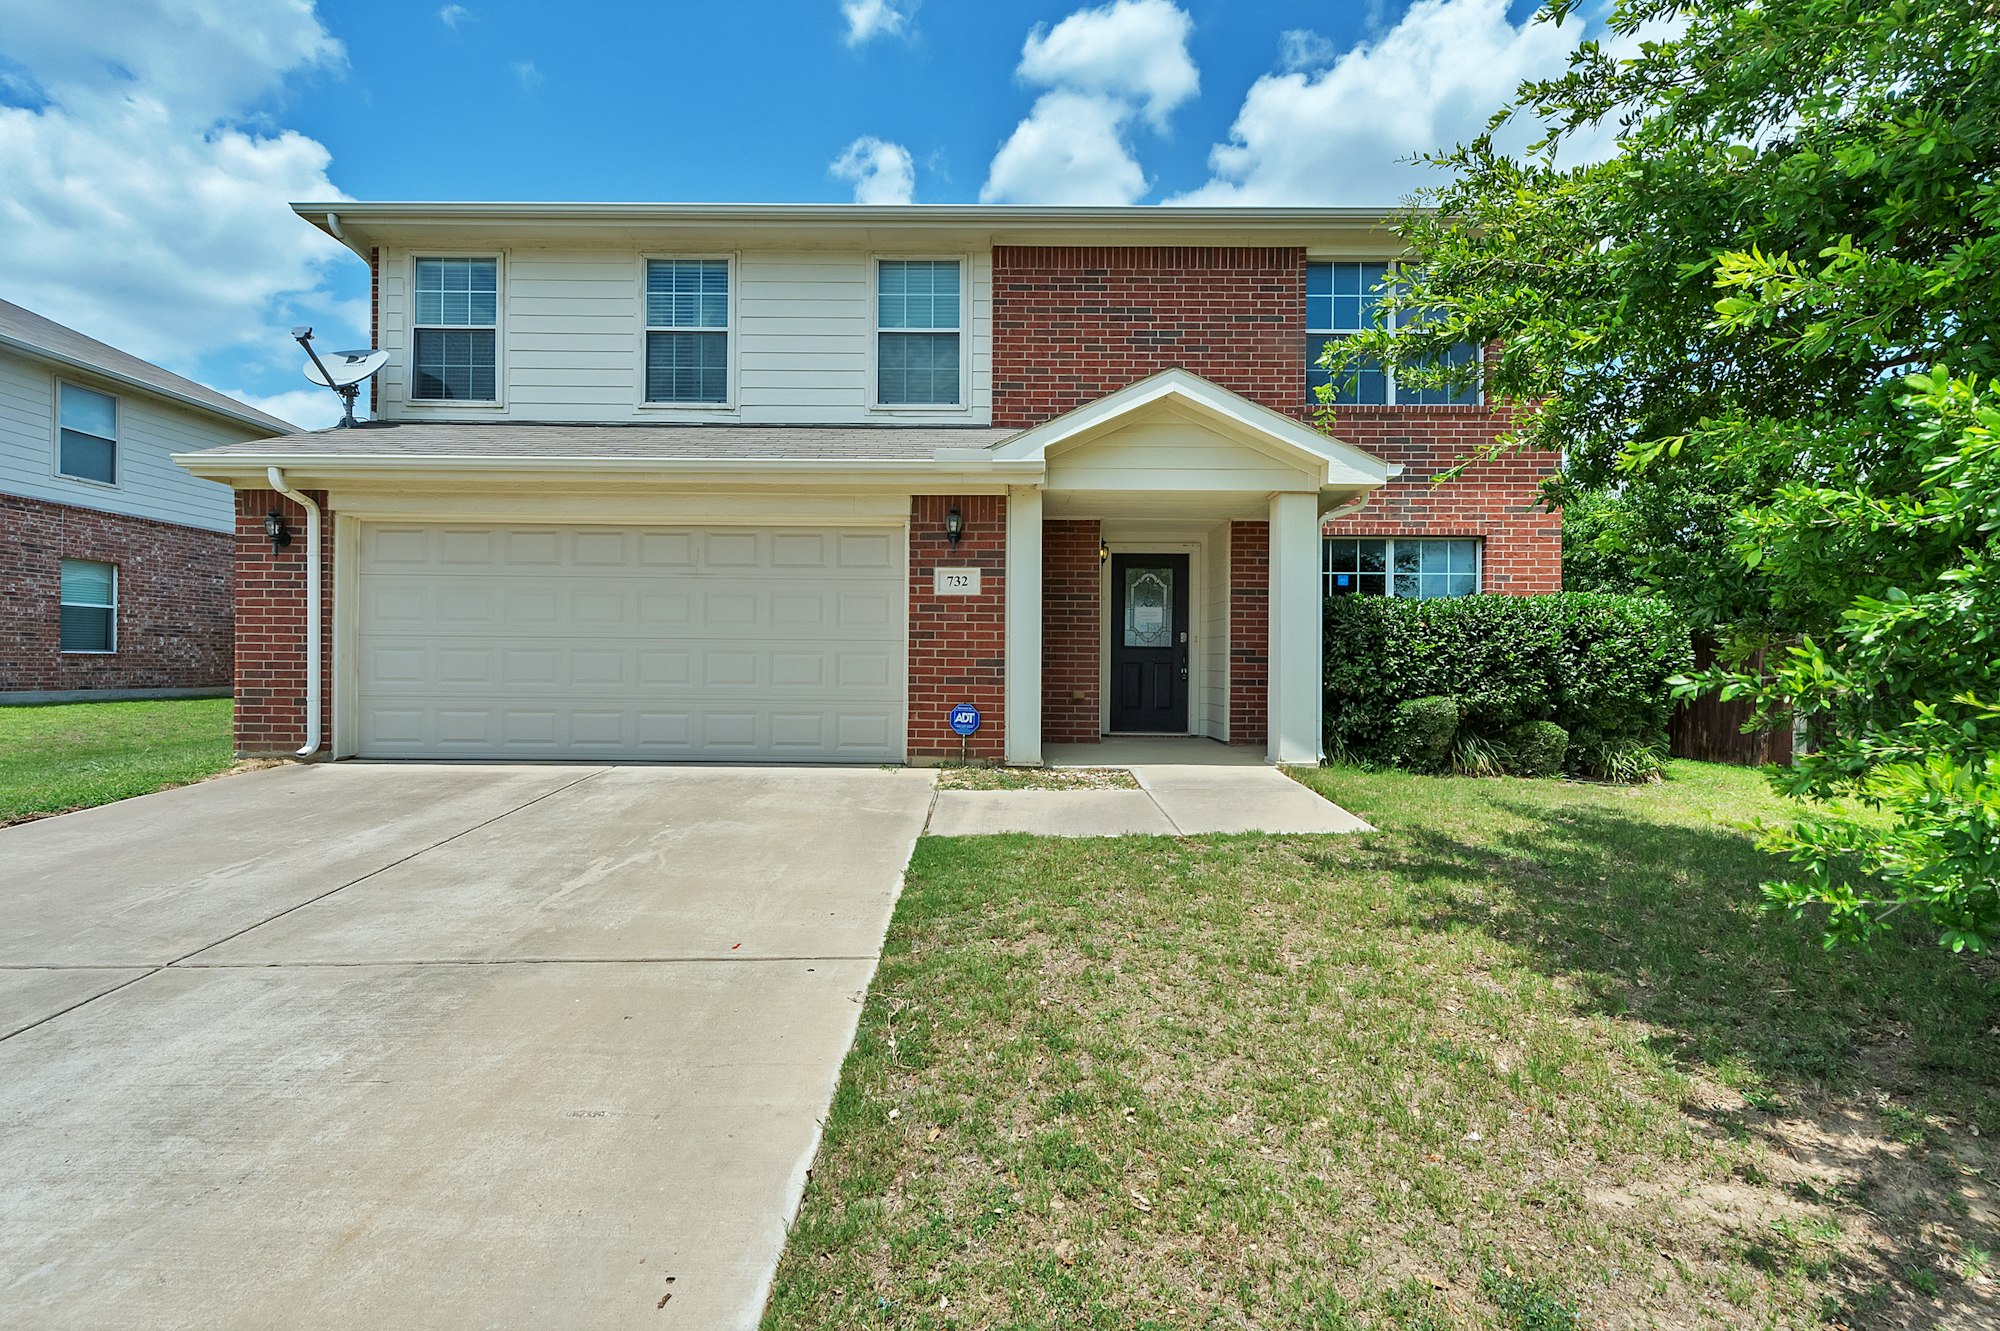 Photo 1 of 28 - 732 Partridge Dr, Fort Worth, TX 76131